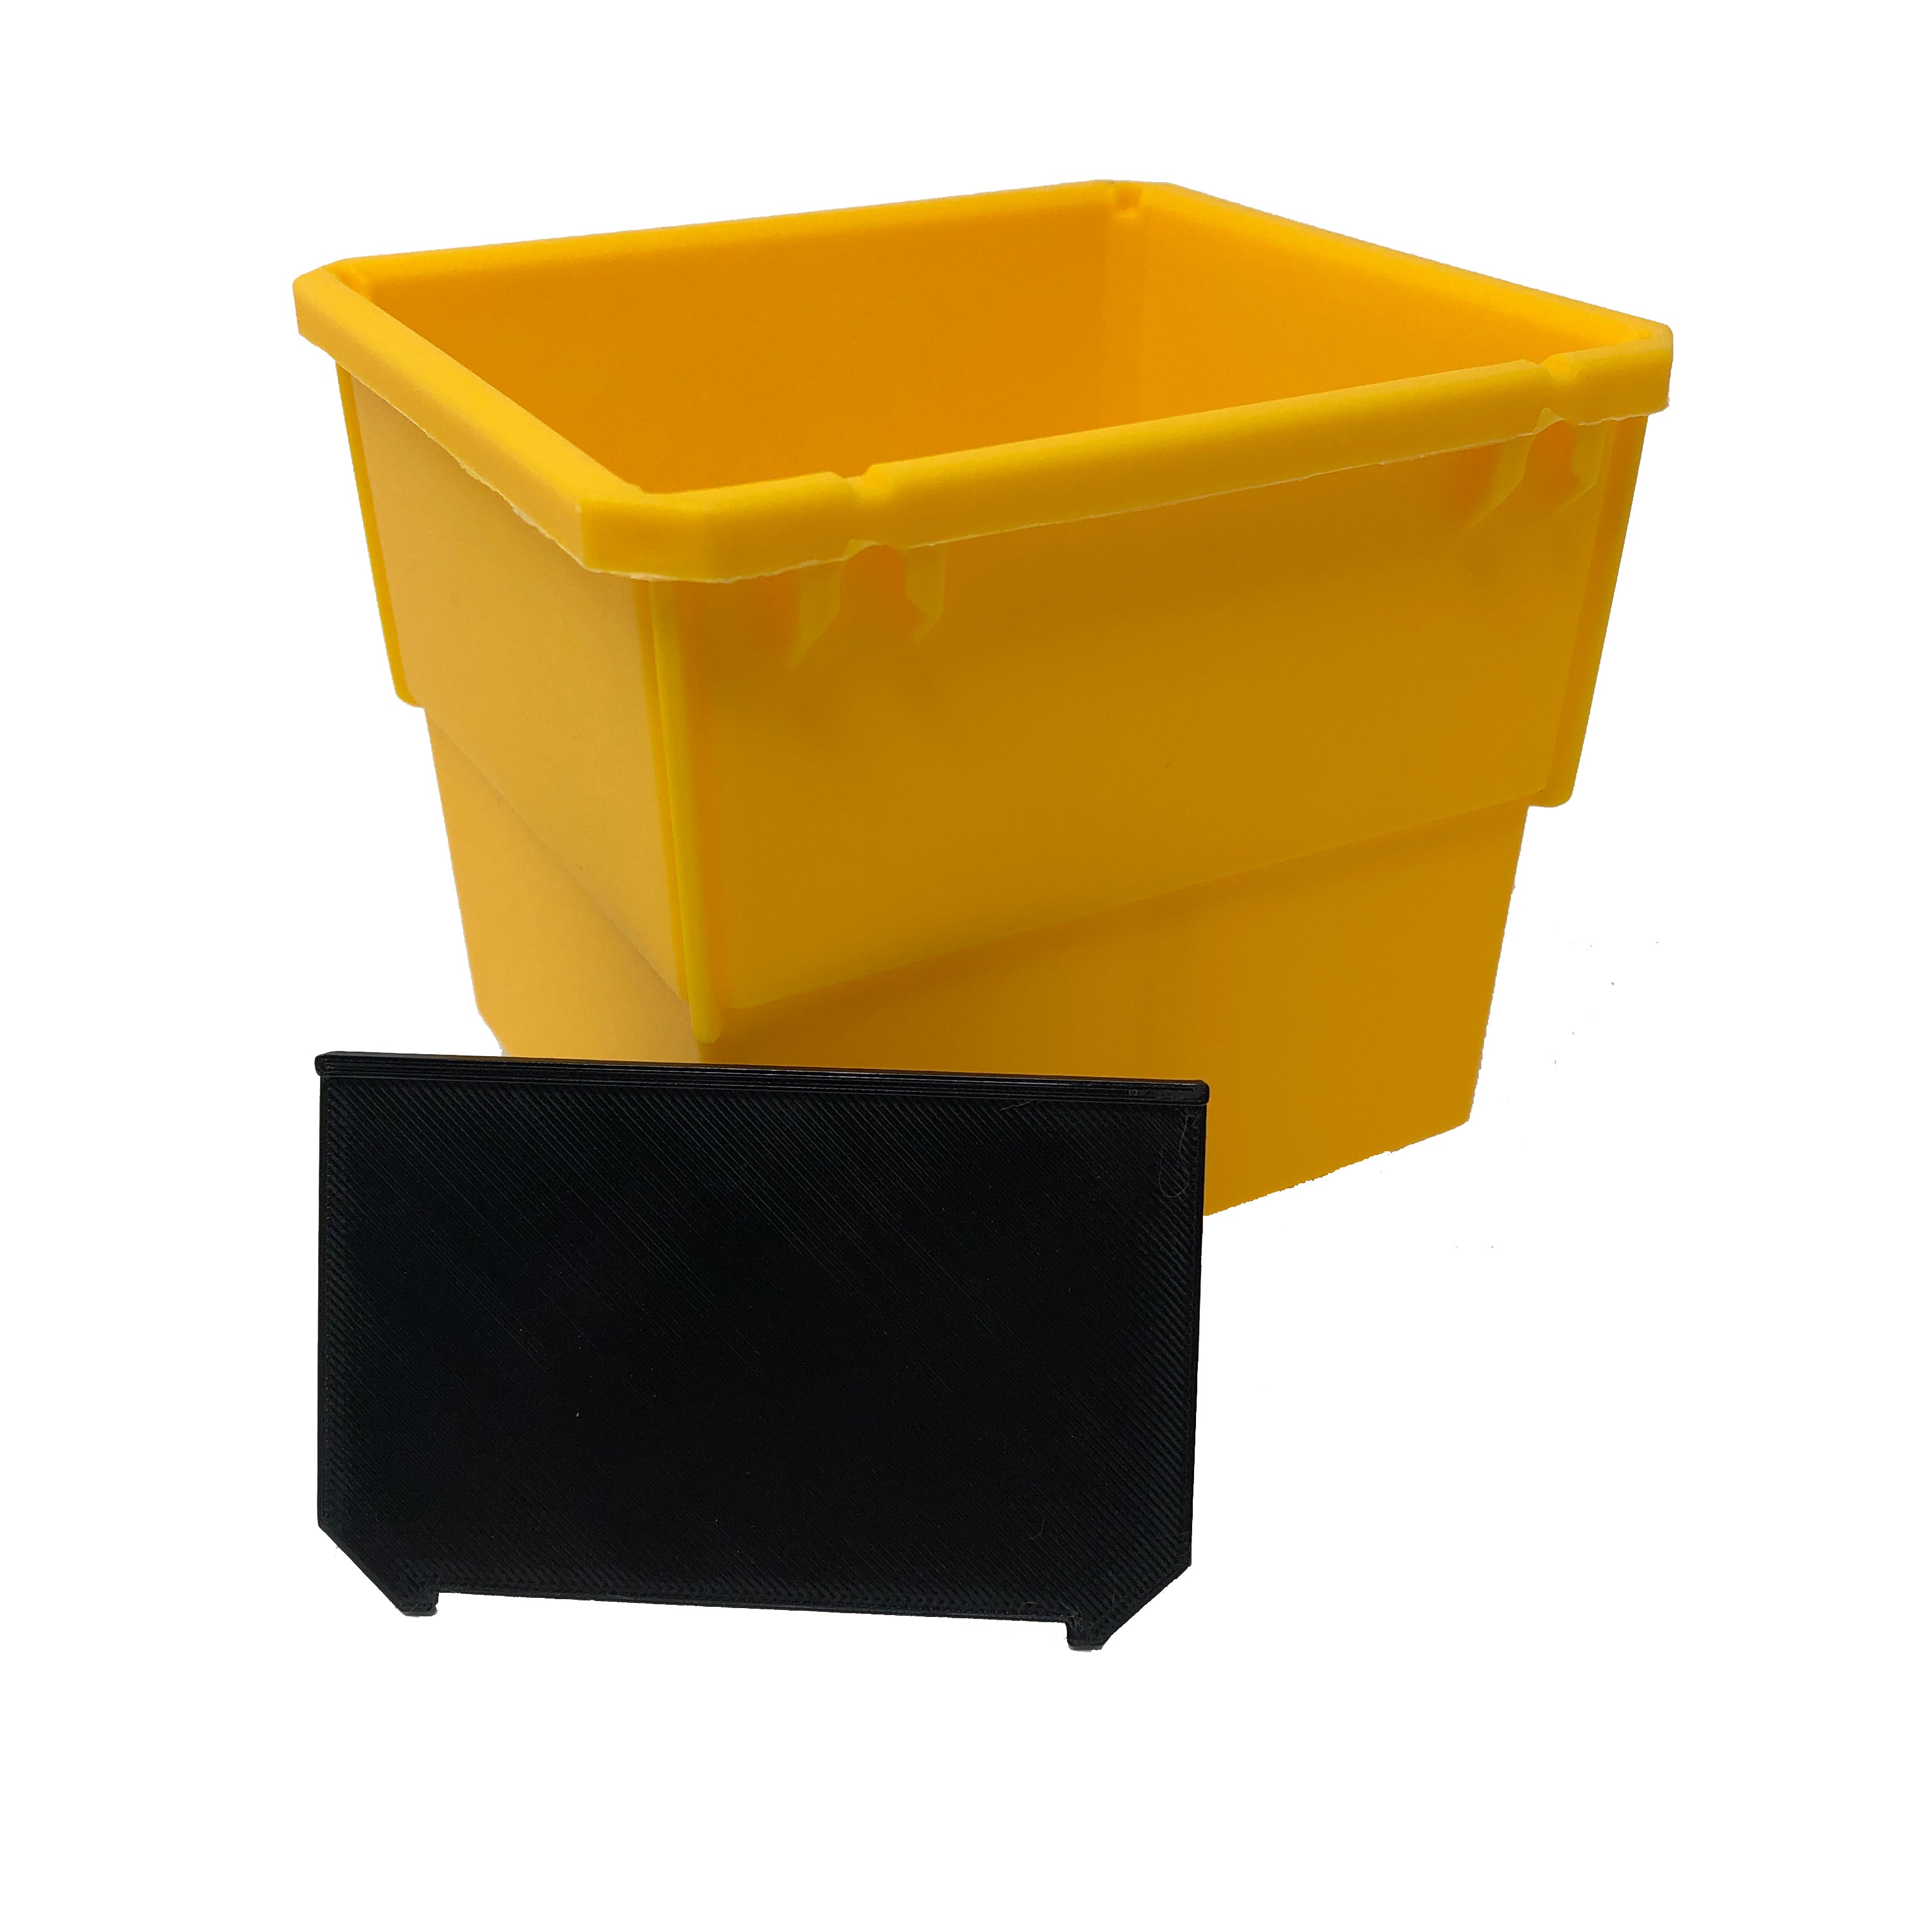 Bin Divider for Extra Large Yellow Parts Bin